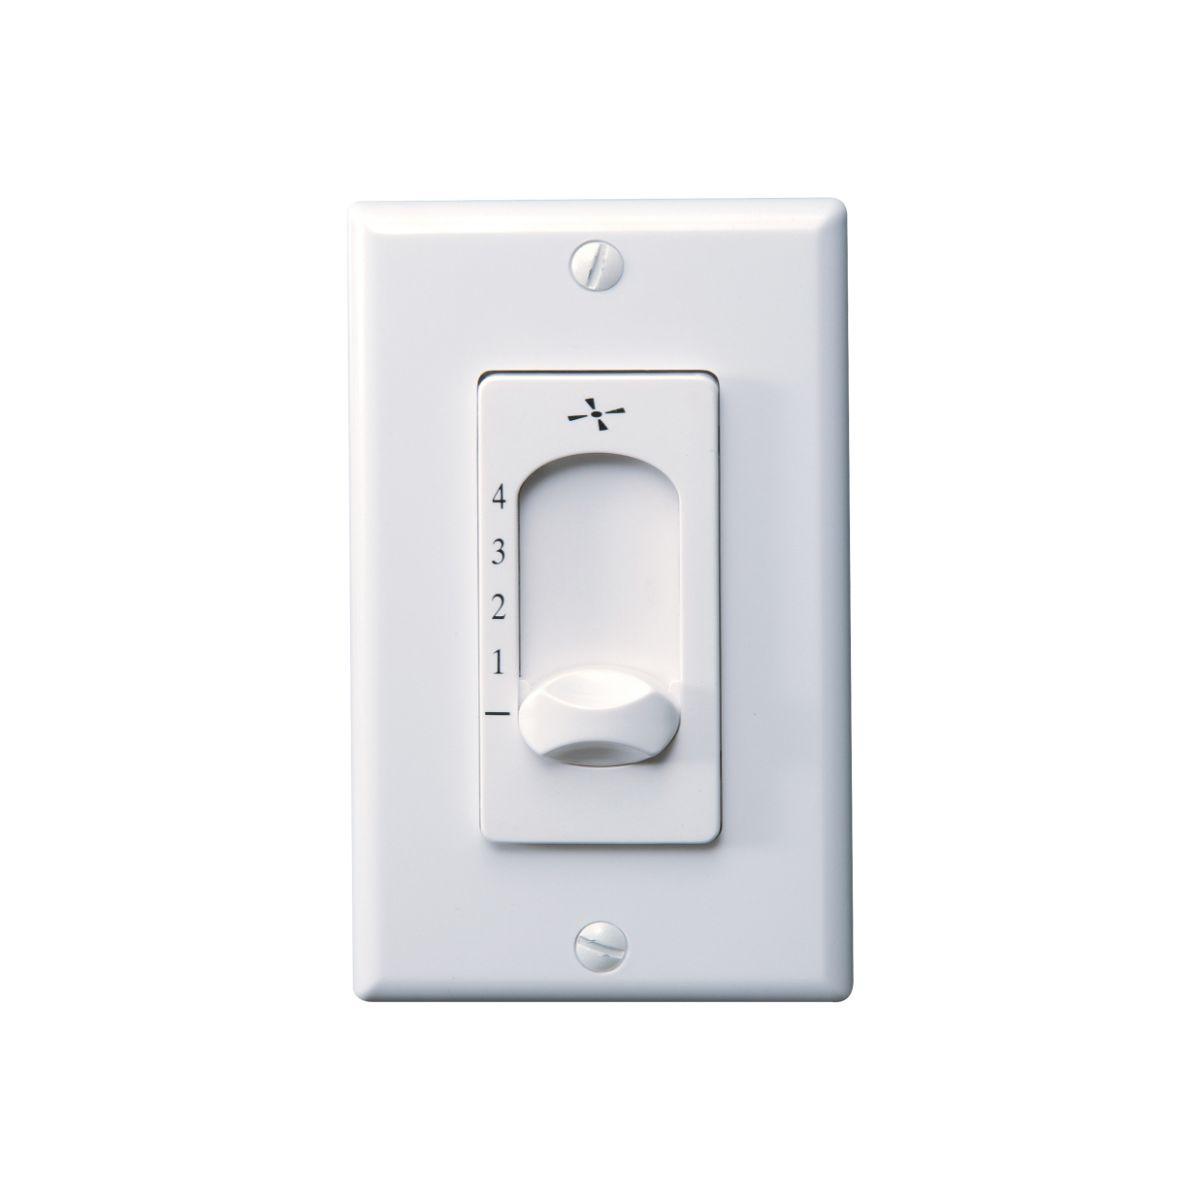 Universal 4-Speed Ceiling Fan Wall Control, White Finish